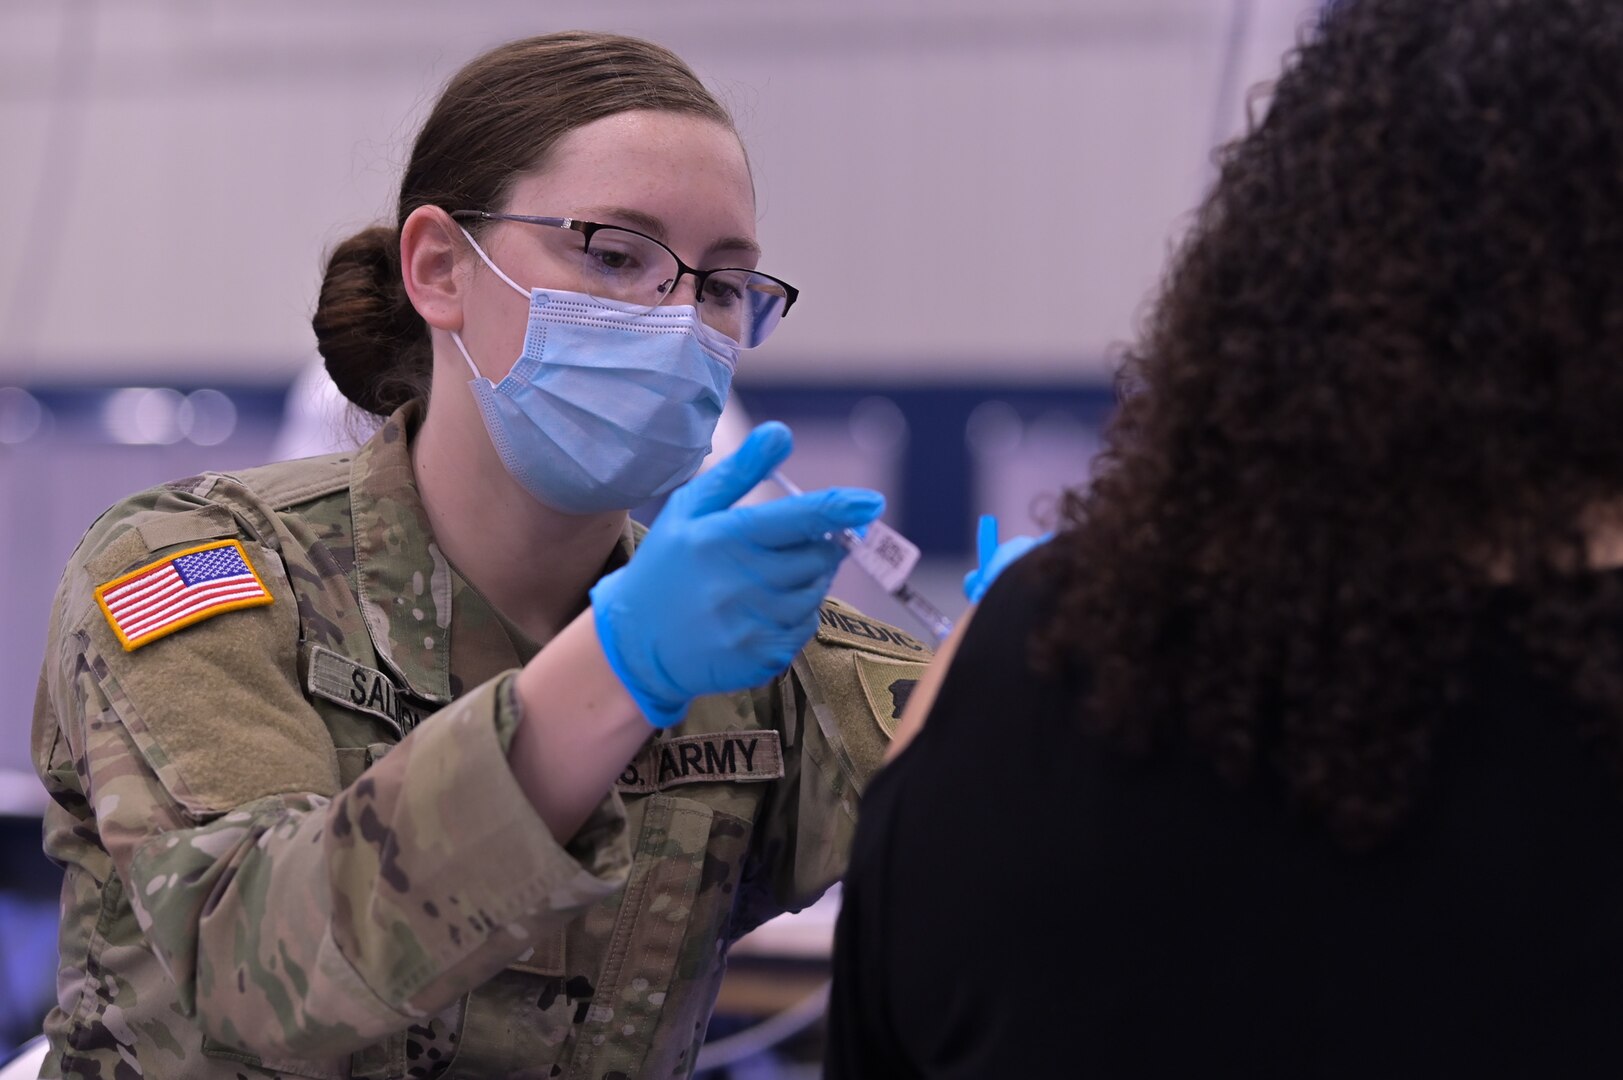 Illinois Army National Guard Spc. Emily Salmon, 2123 Forward Support Company combat medic, administers the COVID-19 vaccine in the South Suburban College gym, South Holland, Illinois, Feb. 25, 2021. Guard members were called on to support COVID-19 relief efforts.